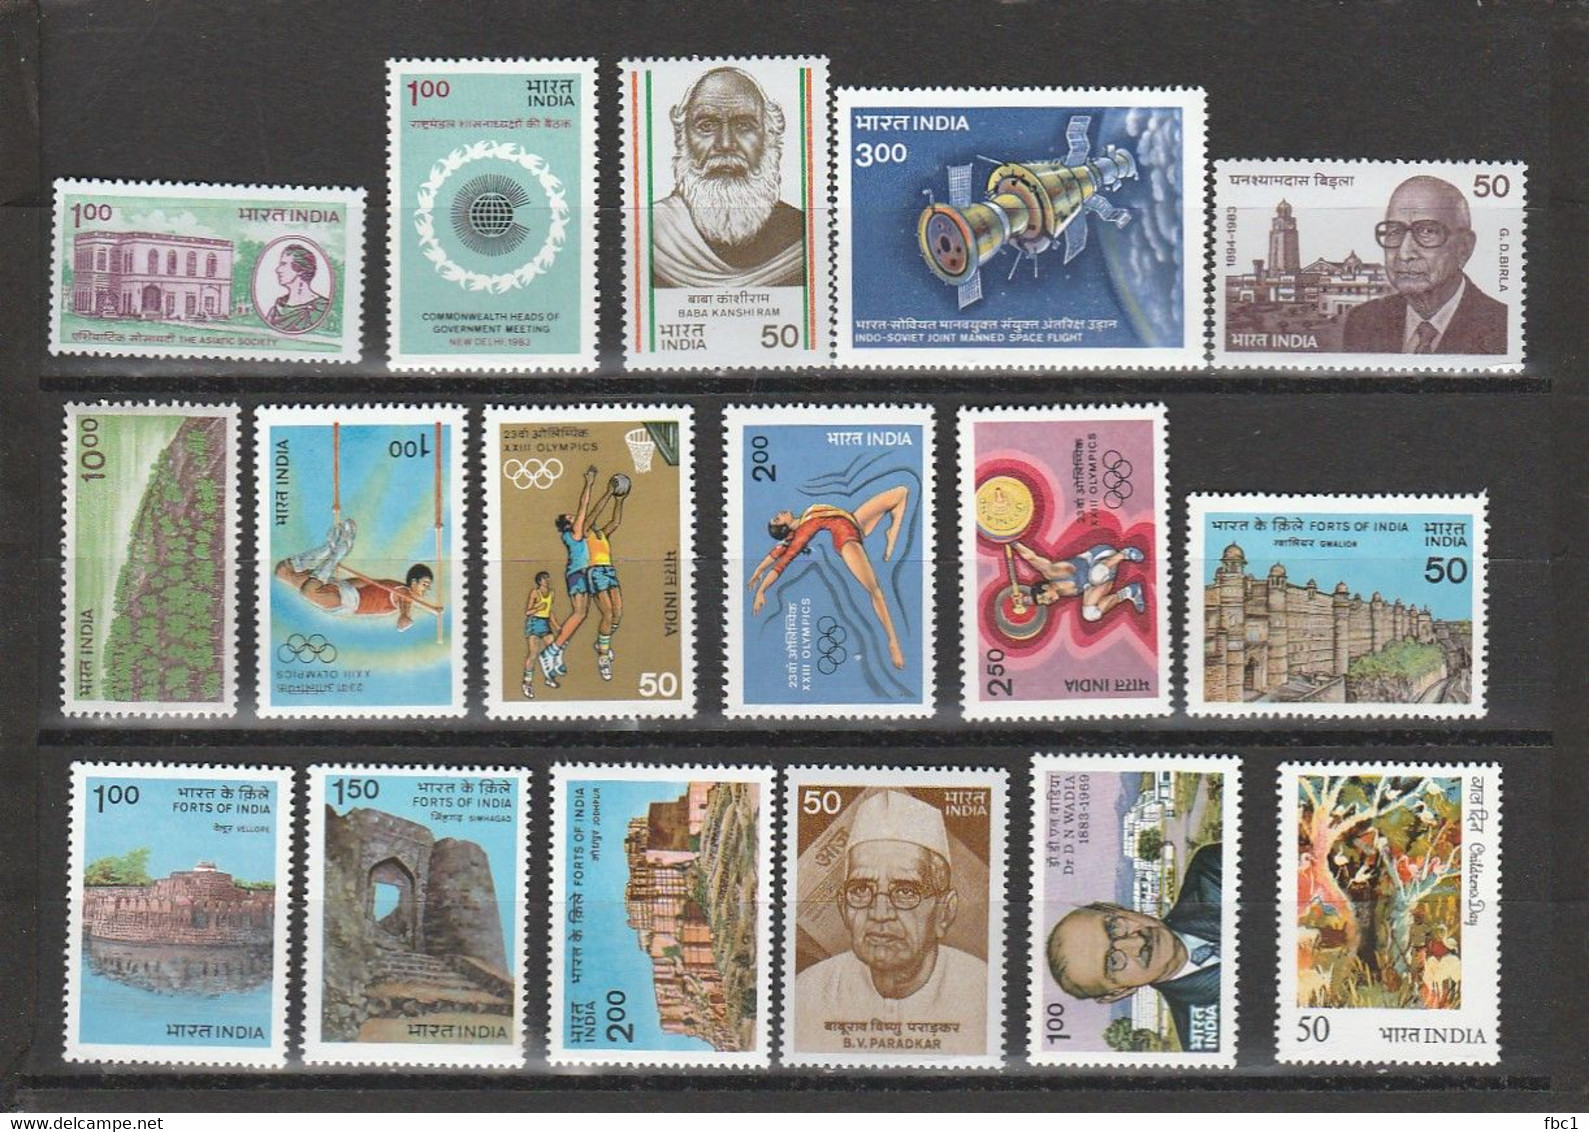 INDE - Collection De 85 Timbres Neufs ** (MNH) - Lots & Serien